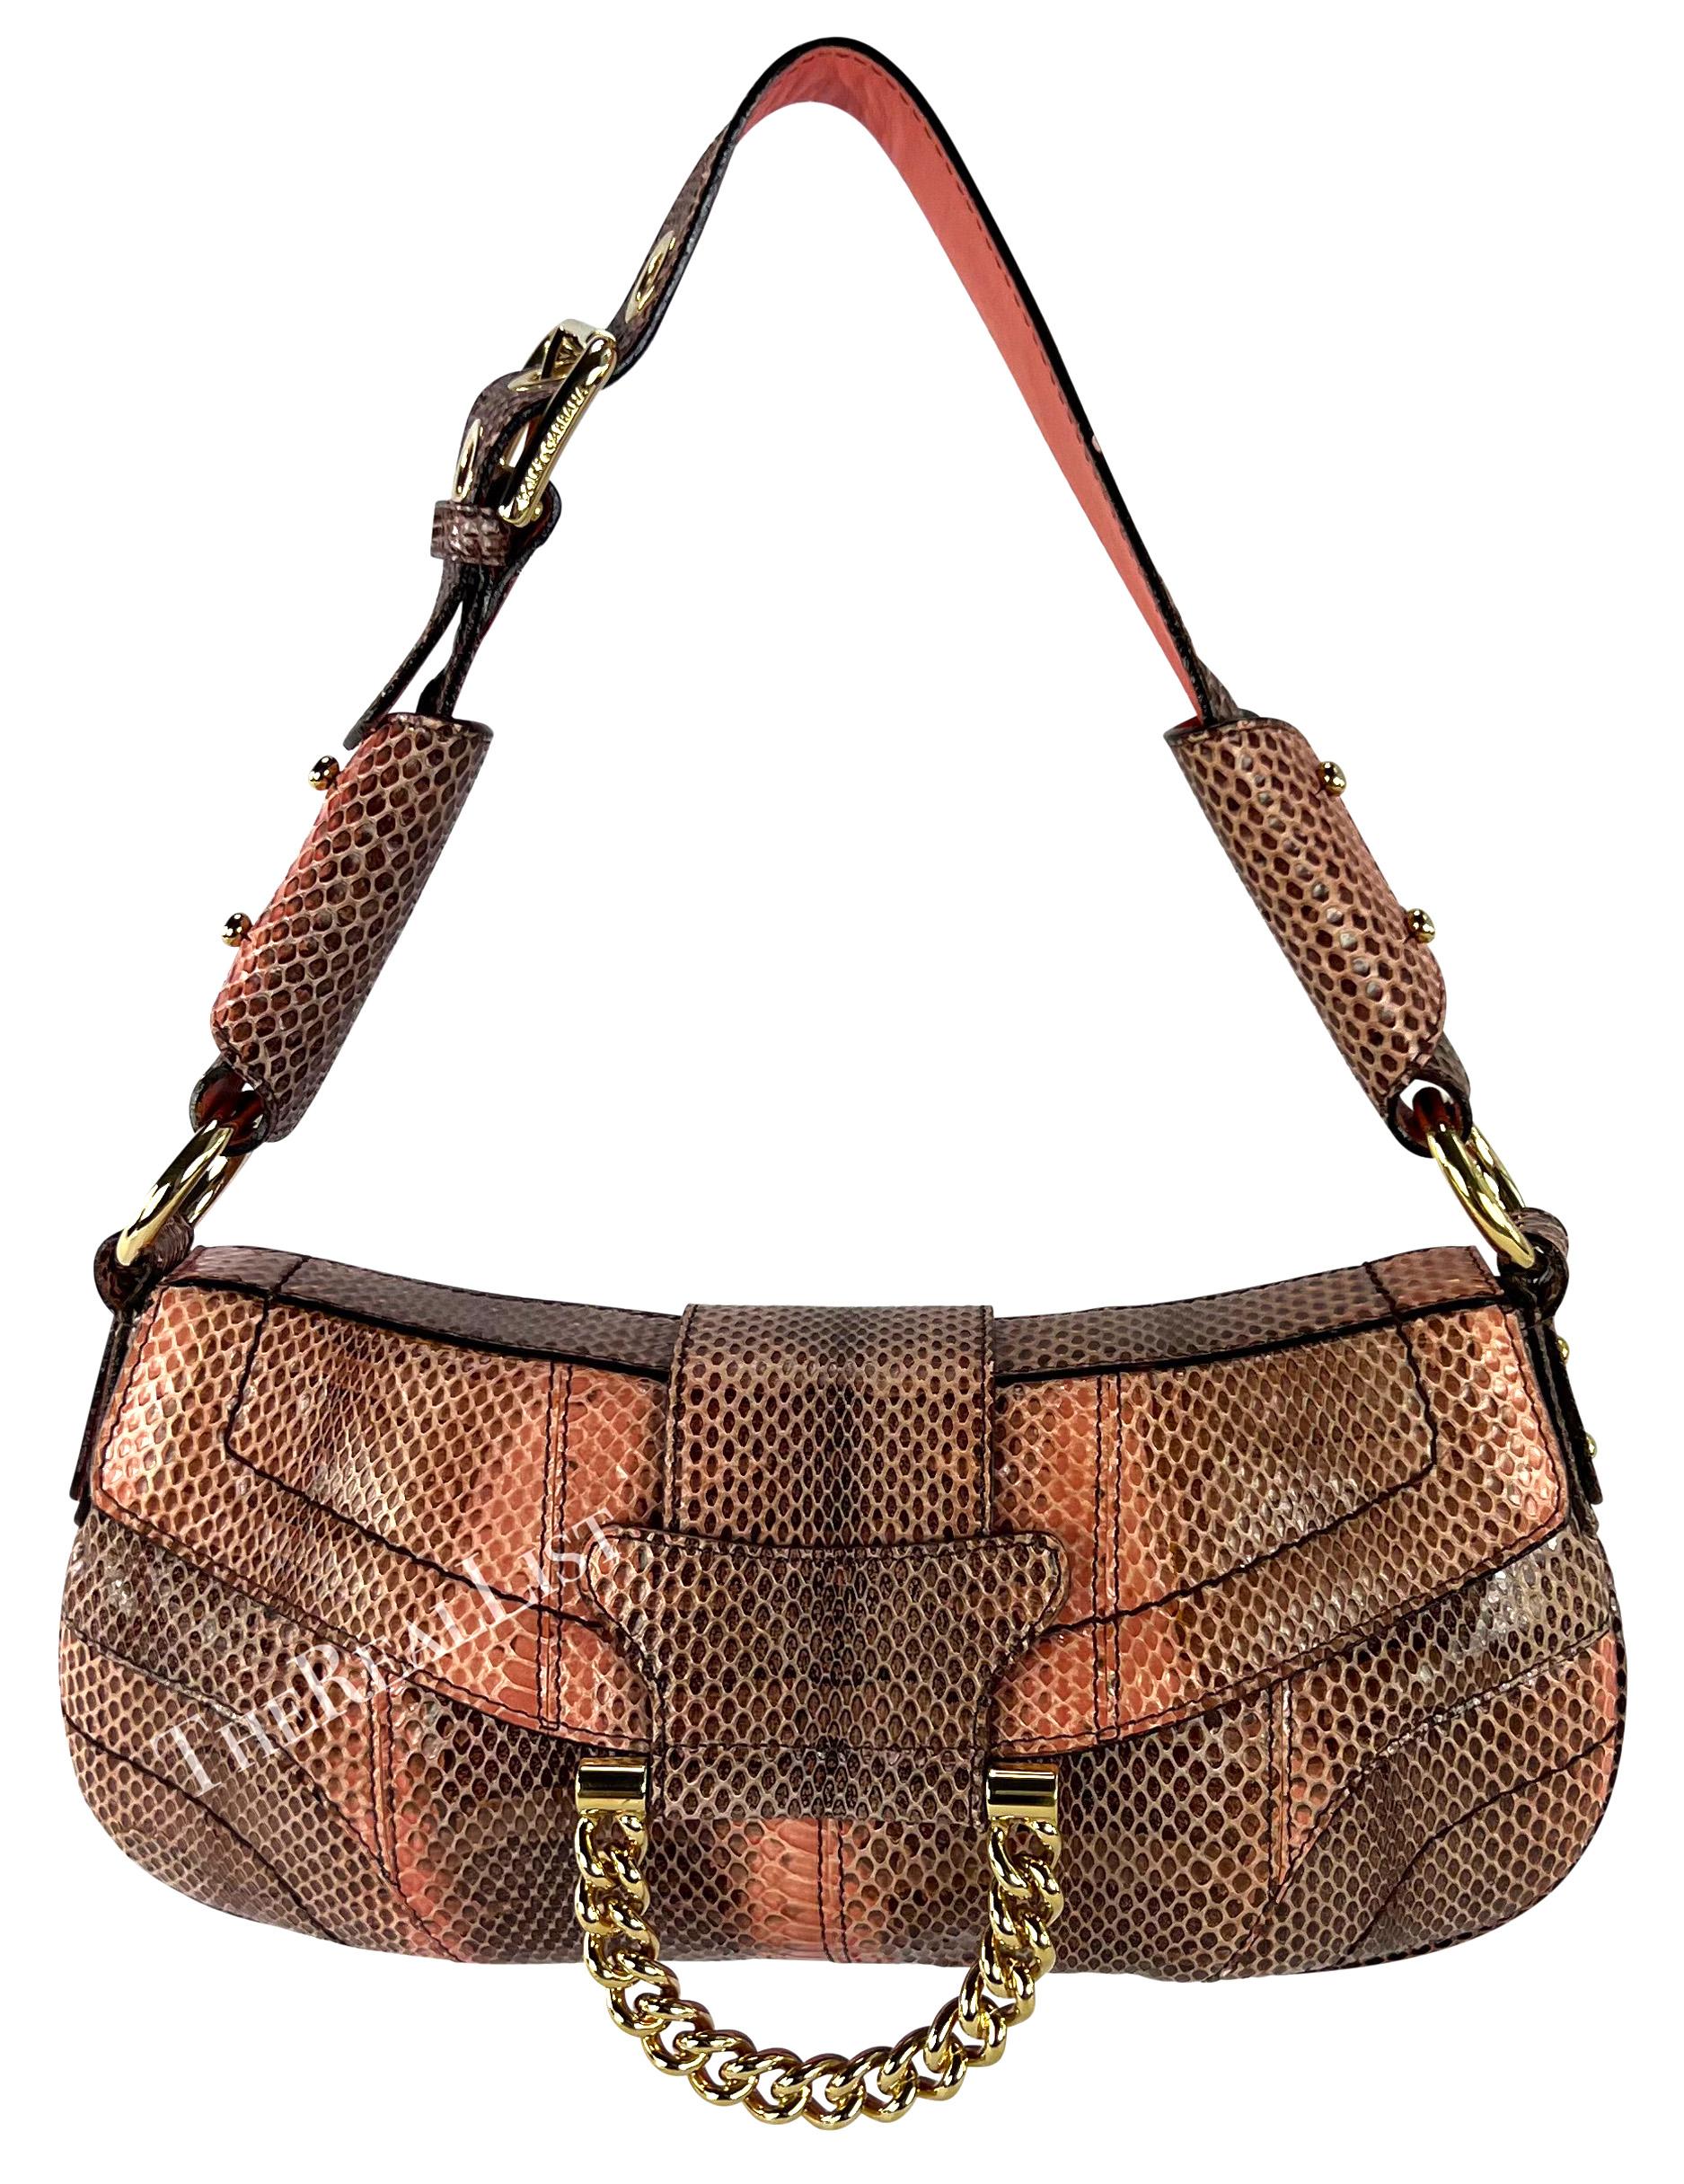 From 2004, this fabulous salmon pink python-skin Dolce & Gabbana shoulder bag has been constructed entirely of light pink python skin. This flap bag features gold-tone hardware with a gold-tone chain accent at the front and an adjustable buckle